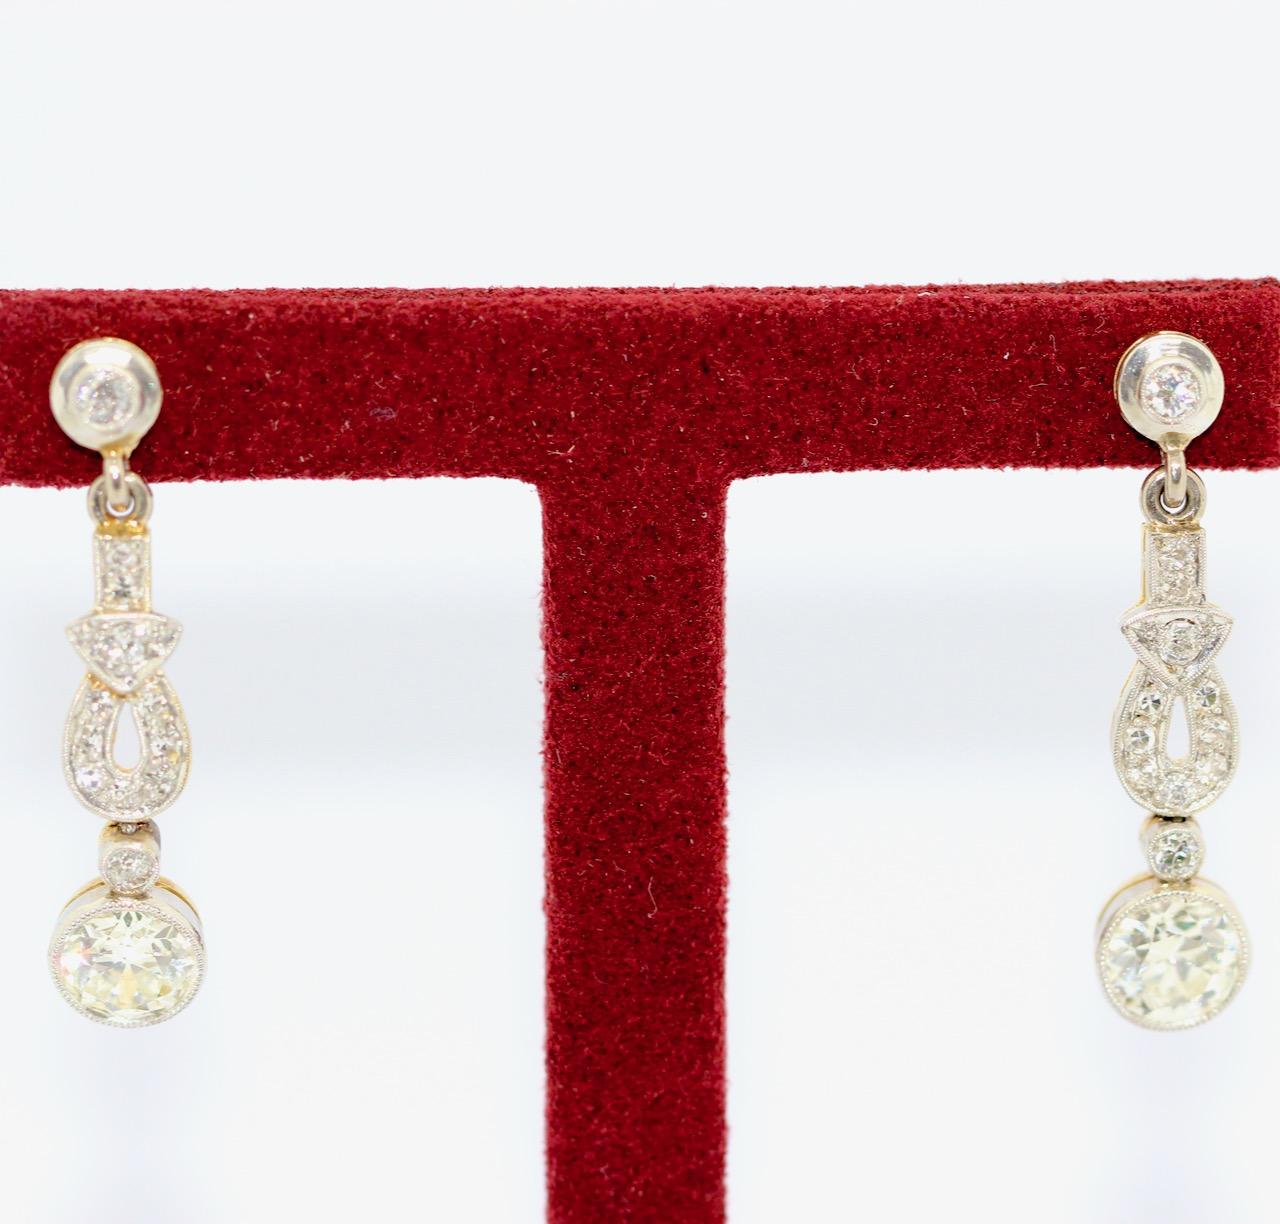 Charming Art Deco Diamond Earrings, Gold and Platinum

The large diamonds has each a size of approx. 1 carat.
Very good quality, inclusions barely visible with a loupe.

Includes certificate of authenticity.